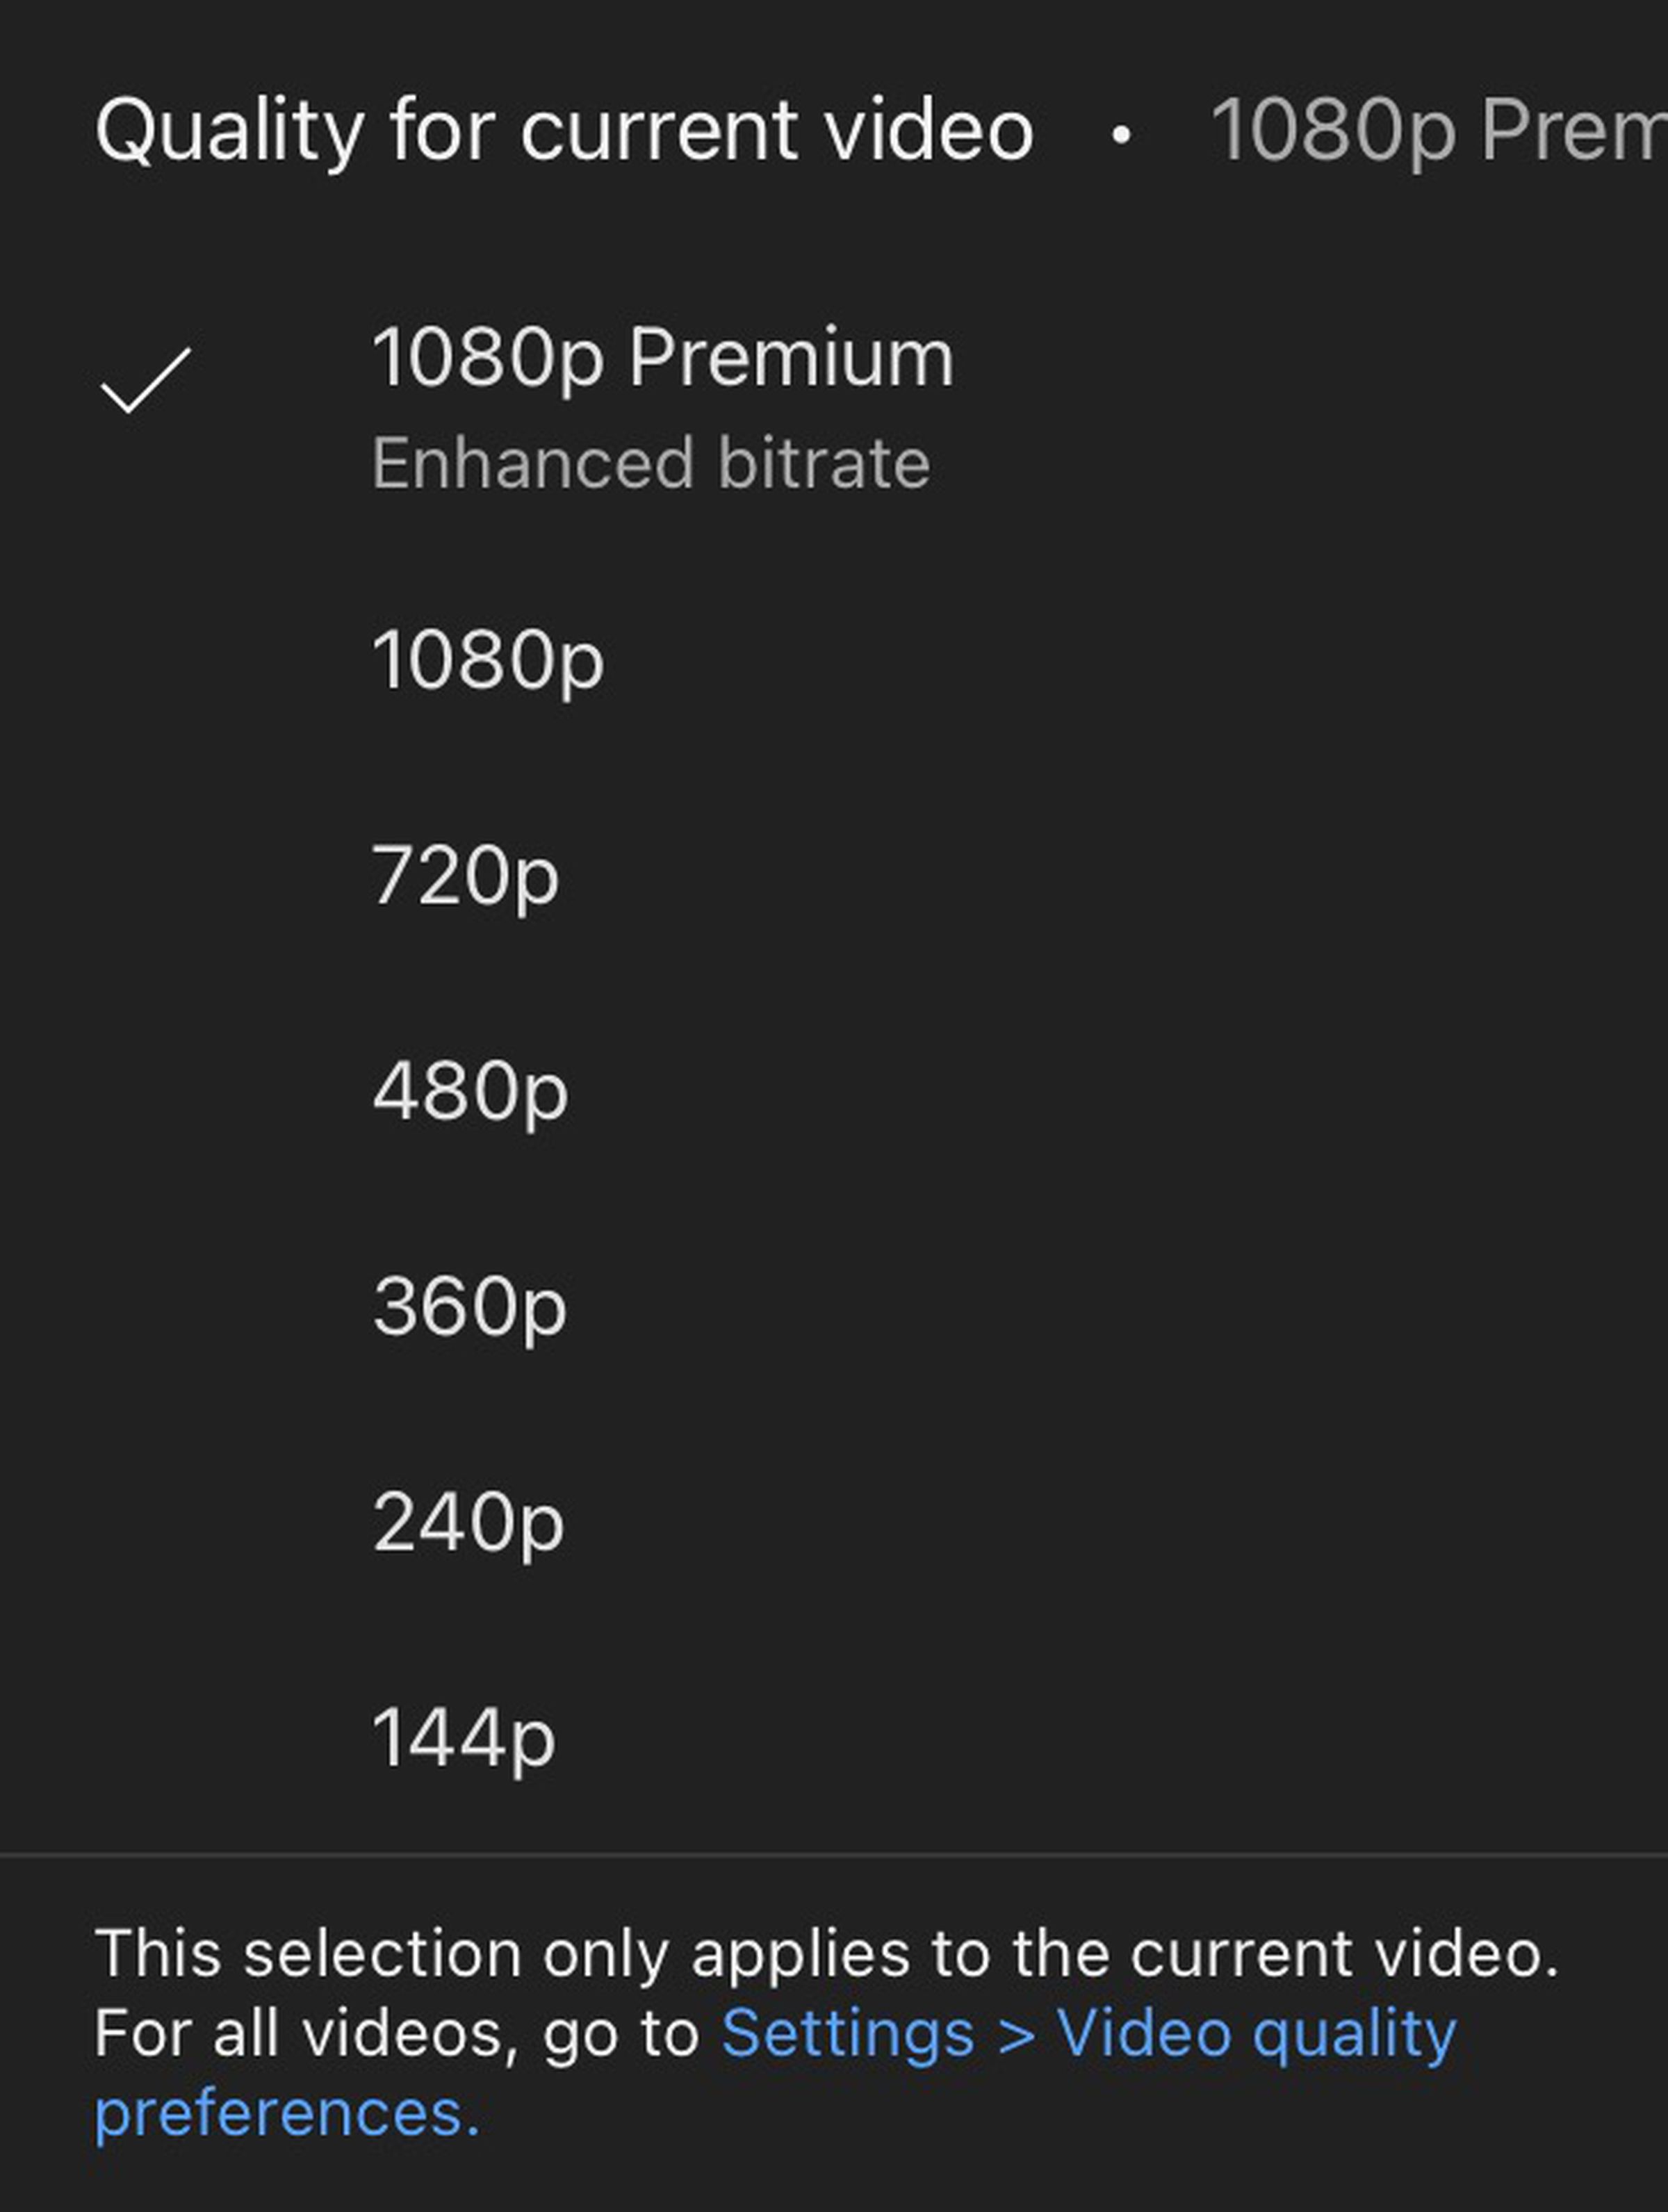 Screenshot of a YouTube quality menu, showing the 1080p Premium option with “enhanced bitrate” alongside the 1080p option.